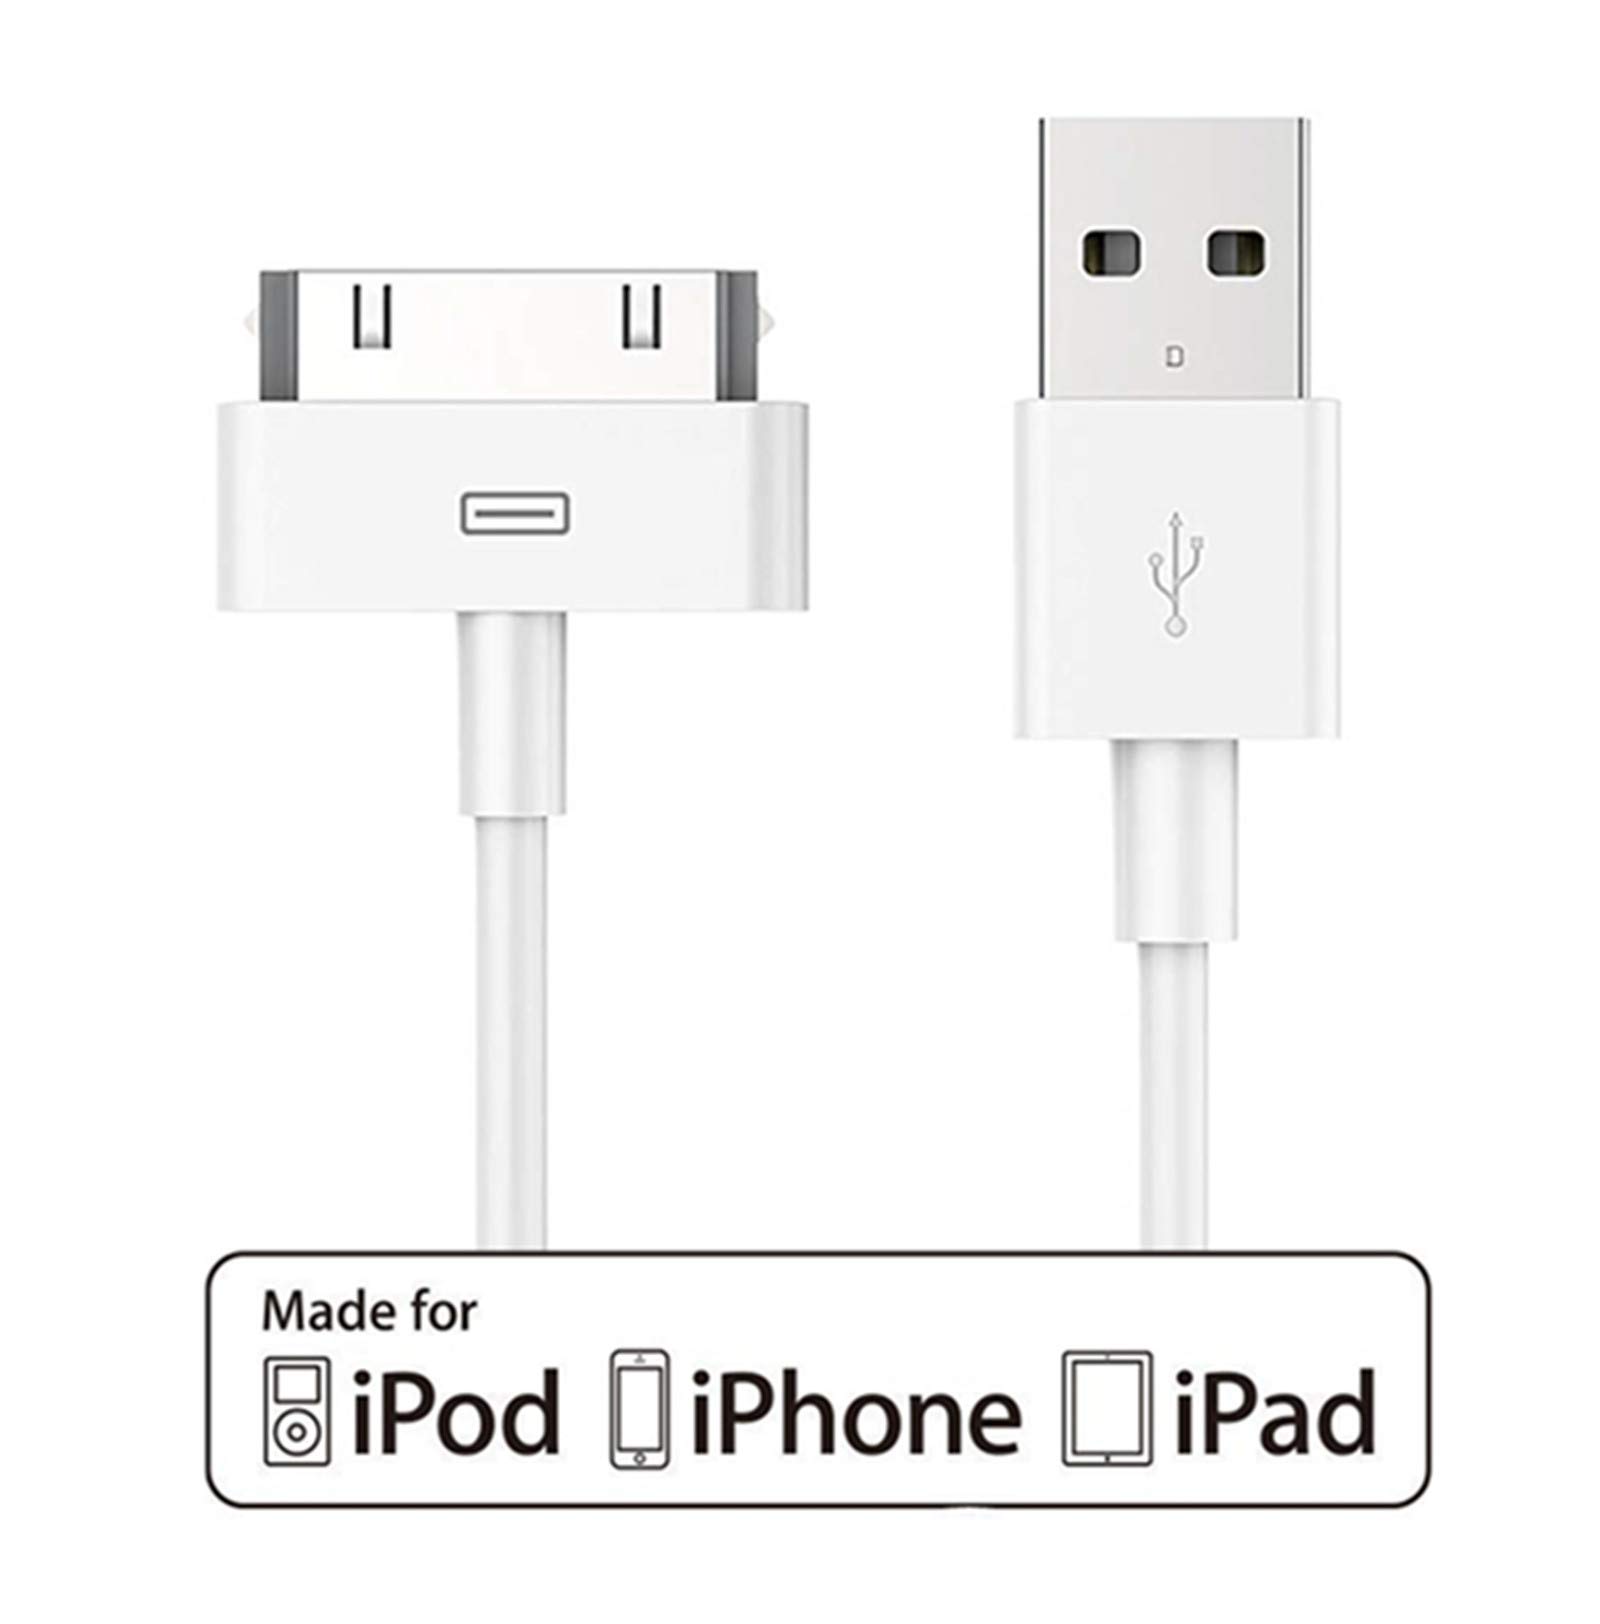 Book Cover [ Apple MFi Certified ] ACEPower 10ft 3M [ Extra Long ] 30 pin to USB Sync and Charging Cable for Apple iPhone 4, iPhone 4s / iPhone 3G / 3GS / iPad 2, iPad 3 / iPod 1, 2, 3, 4, 5, 6 (White)